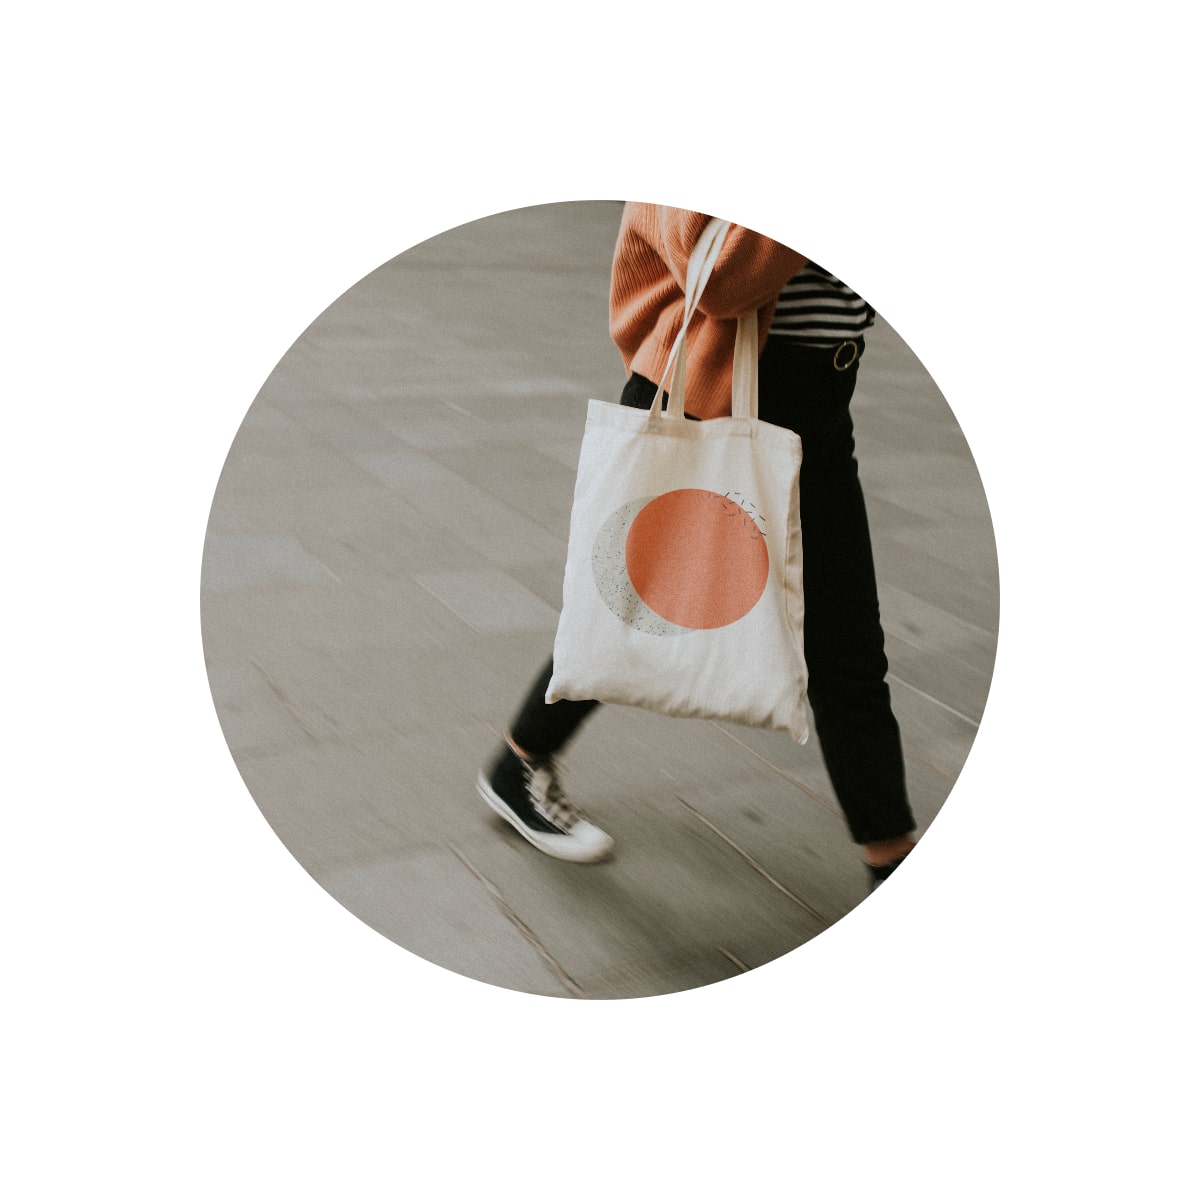 How do I choose the right promotional tote bag?